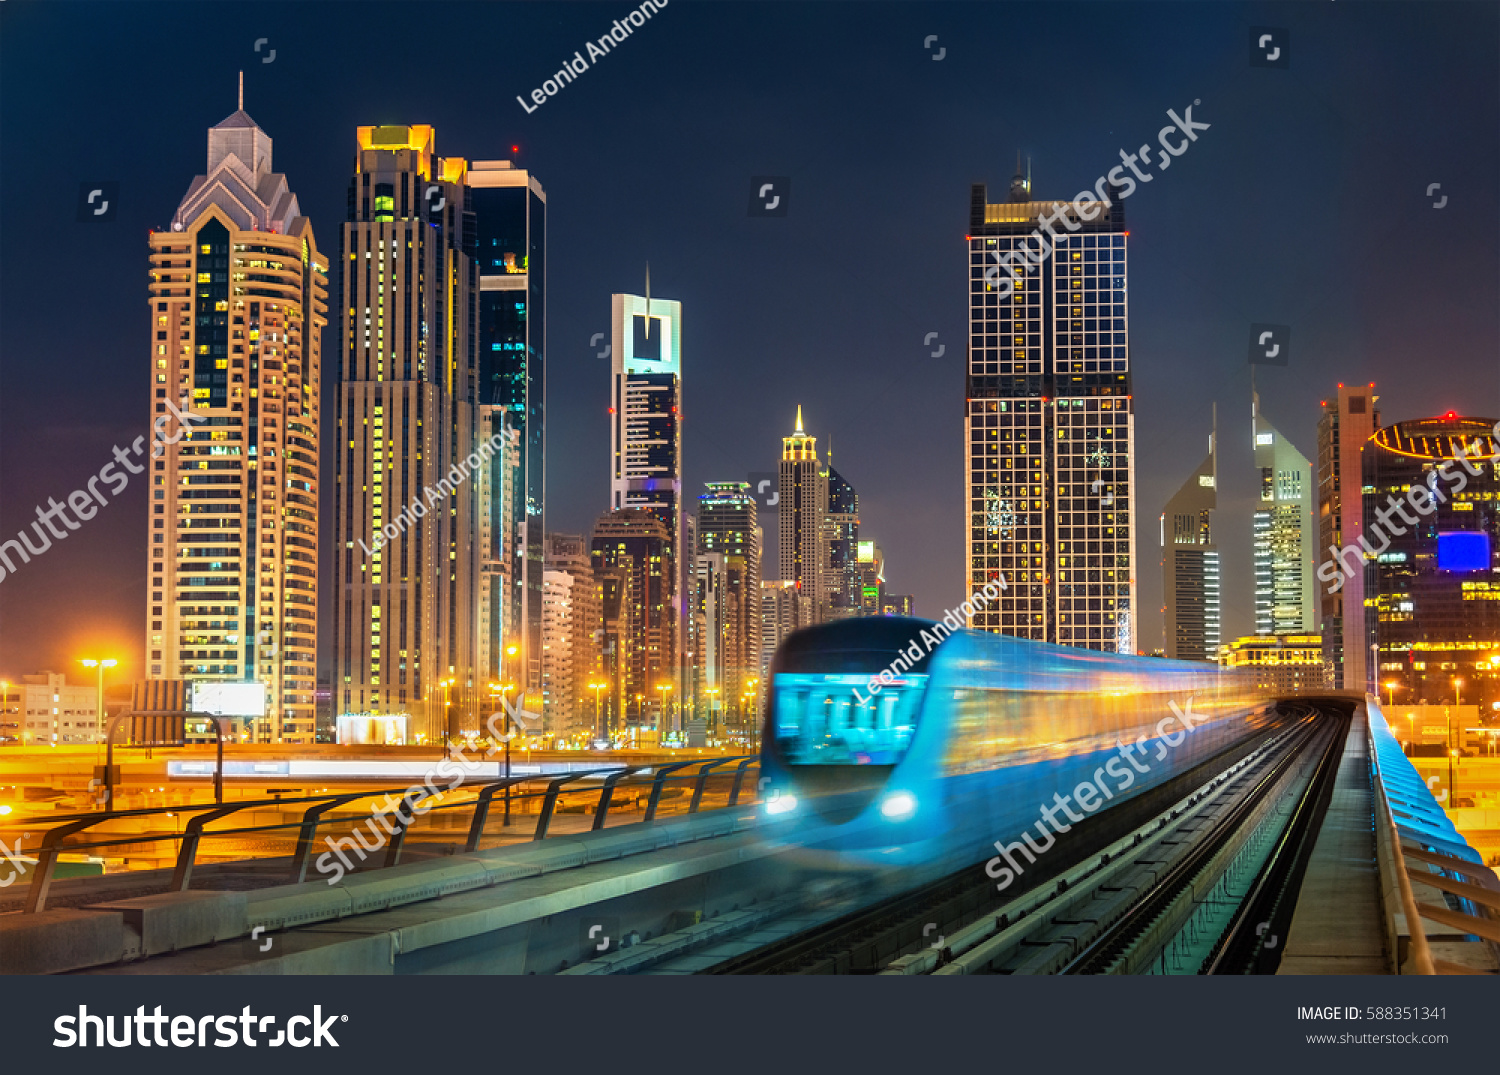 Driverless metro train with skyscrapers in the background - Dubai, the United Arab Emirates. #588351341